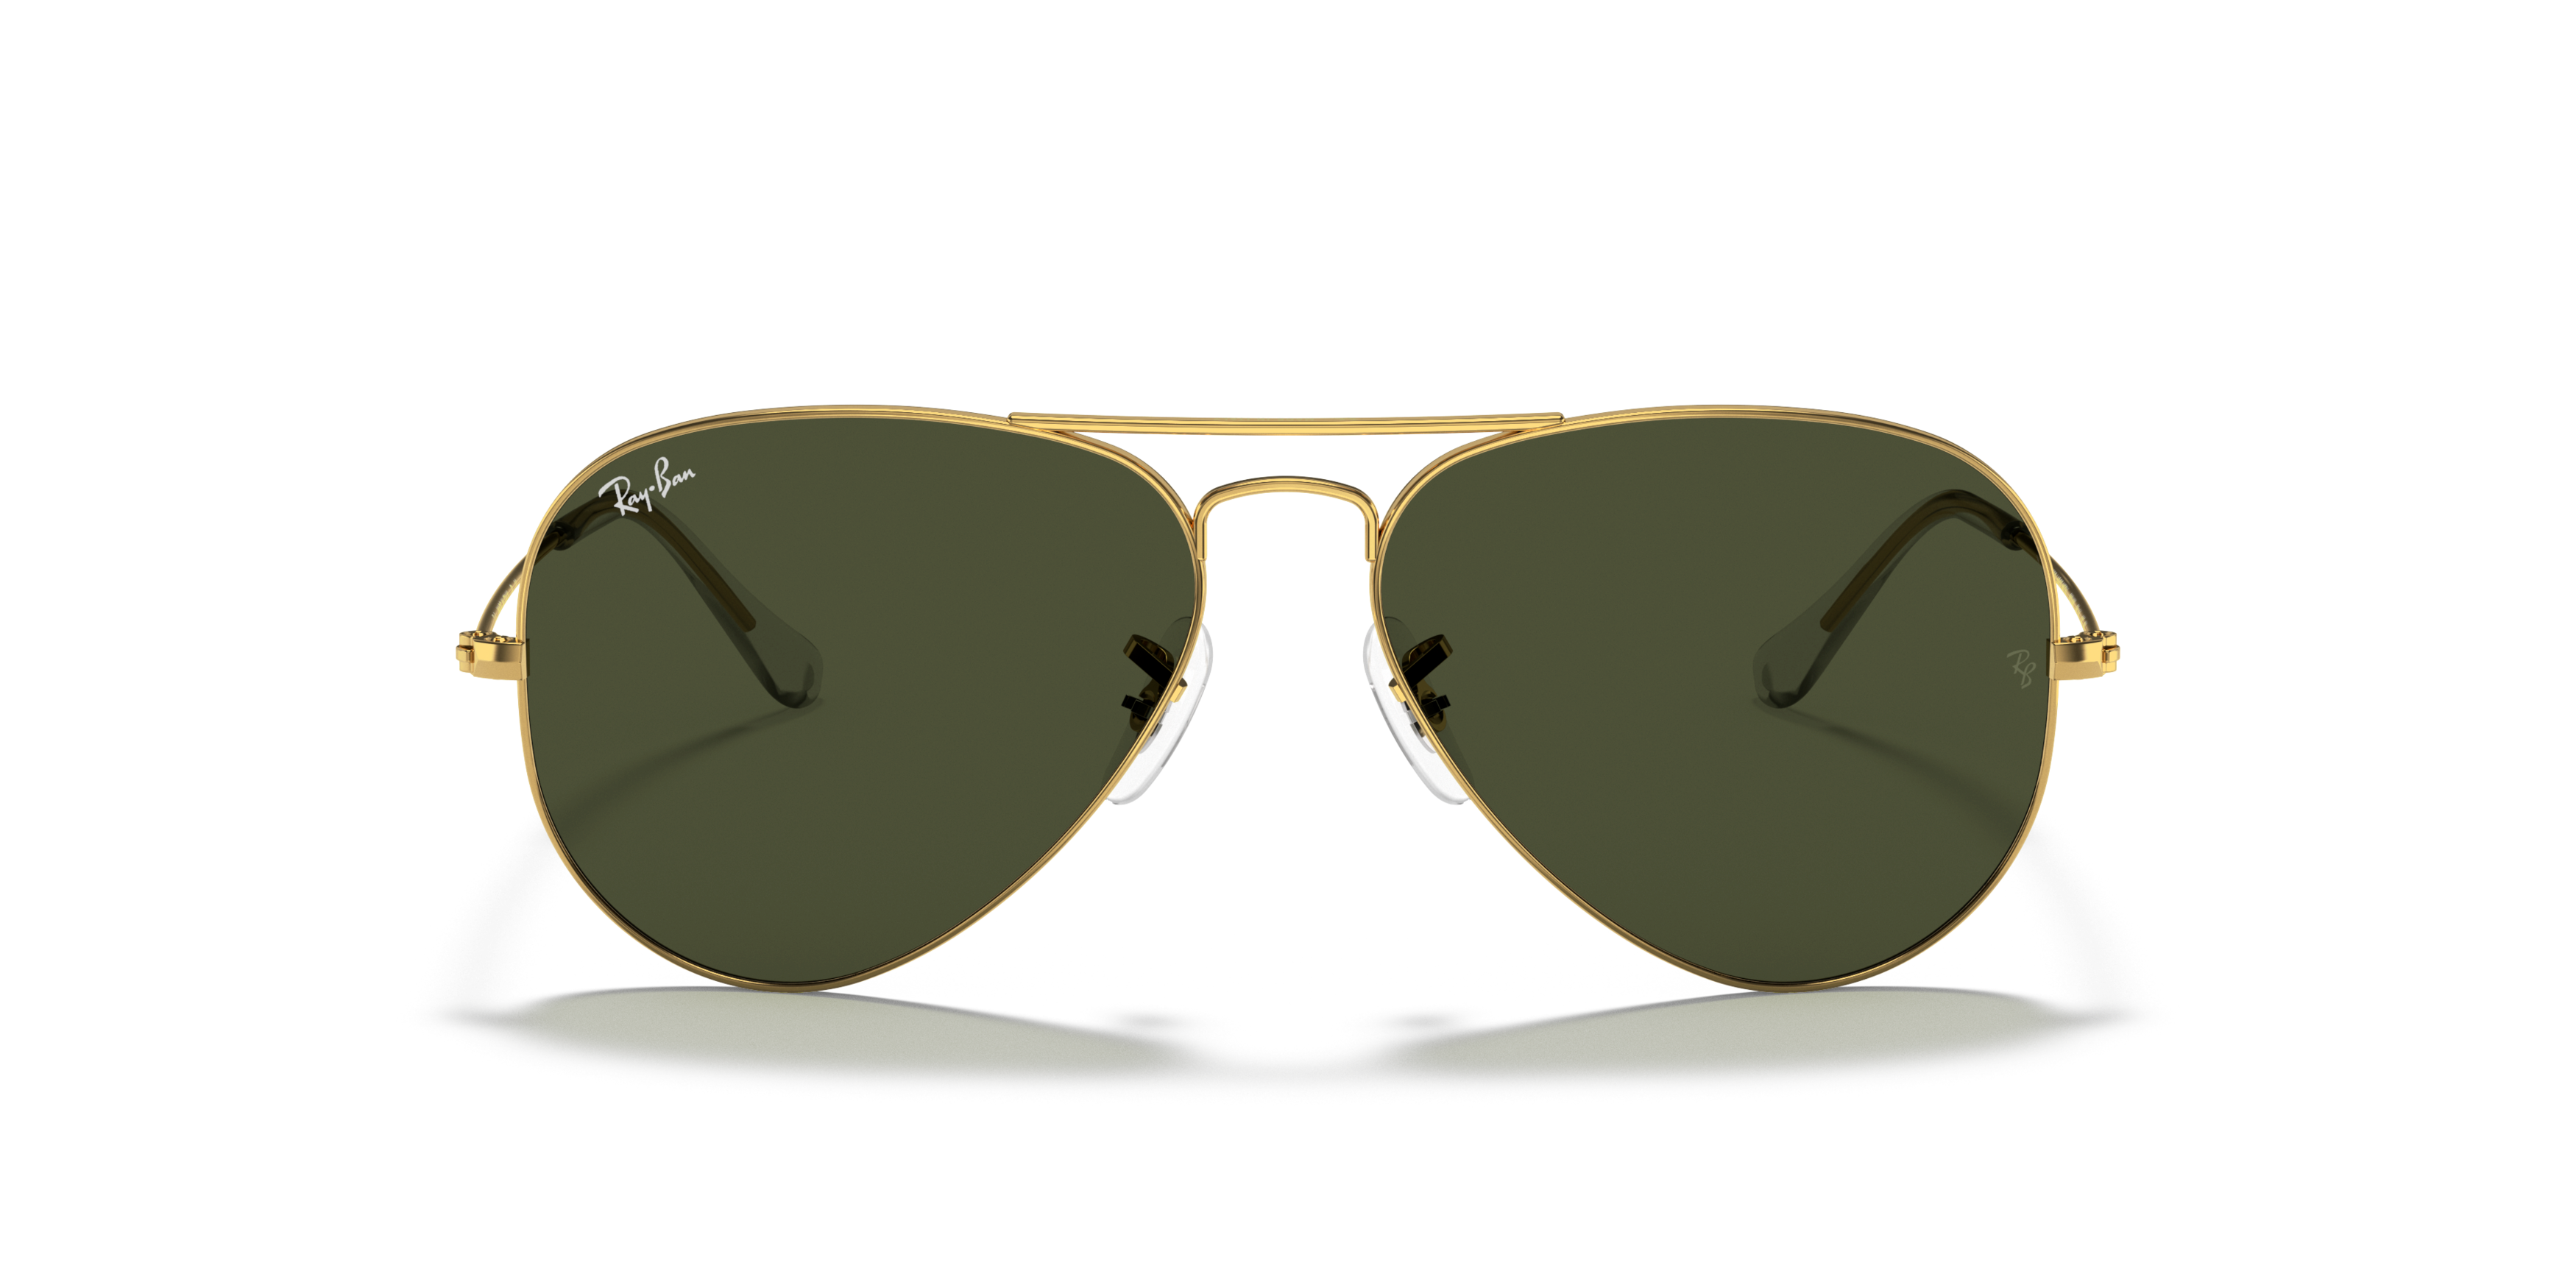 Front Ray-Ban Aviator RB 3025 Sunglasses Black / Gold